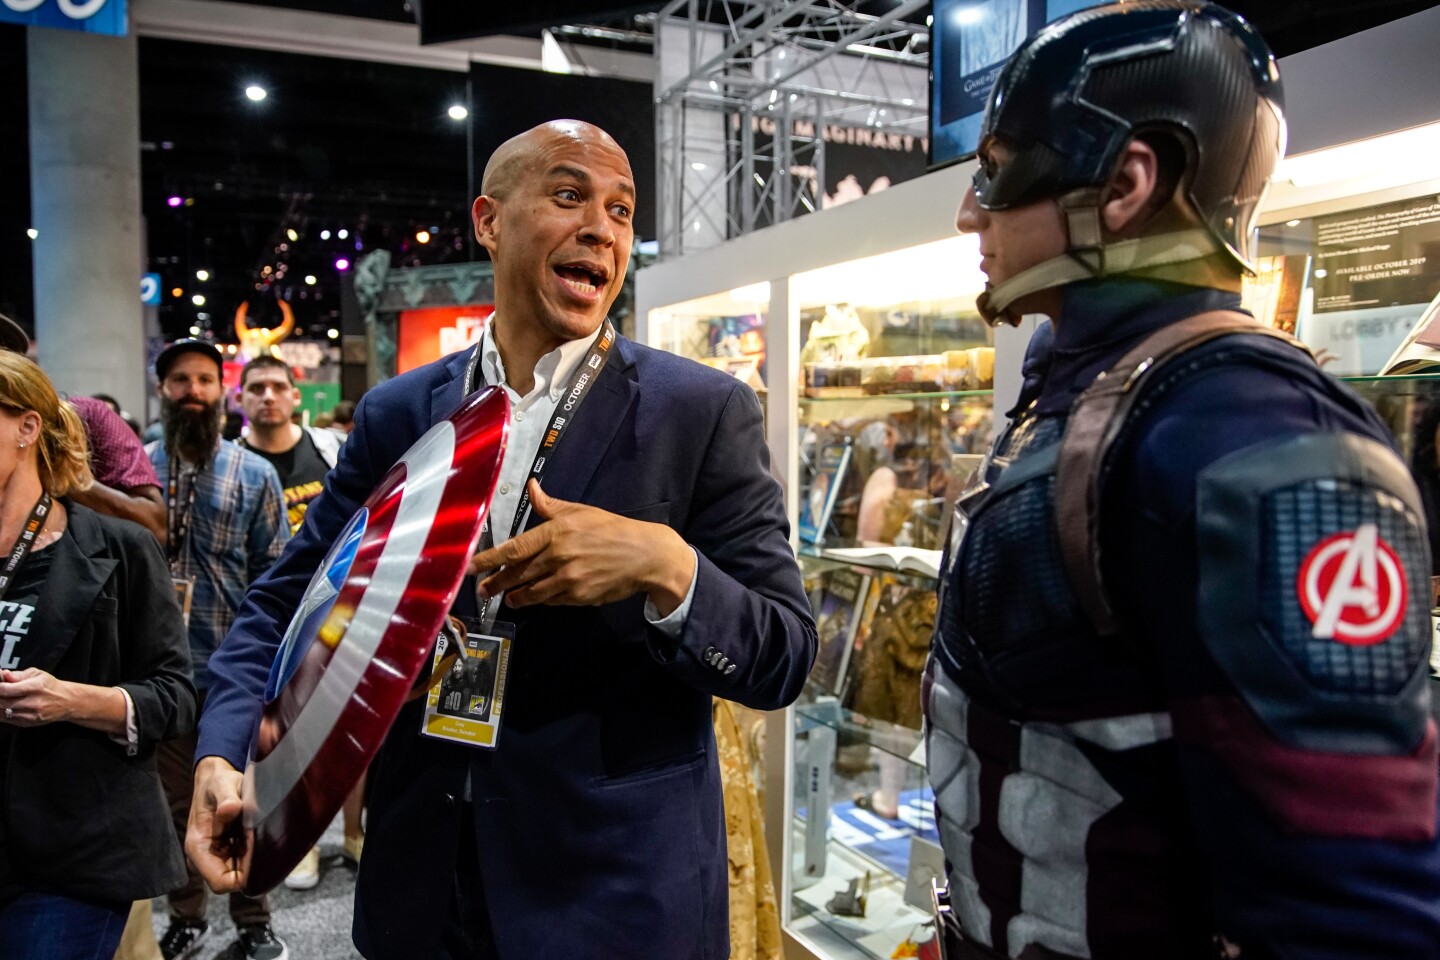 SAN DIEGO, CALIF. - JULY 19: Presidential Candidate Corey Booker talks with John Vash, cosplaying as "Captain America," while holding his shield at Comic-Con International while walking the exhibition hall at the San Diego Convention Center at on Friday, July 19, 2019 in San Diego, Calif. (Kent Nishimura / Los Angeles Times)